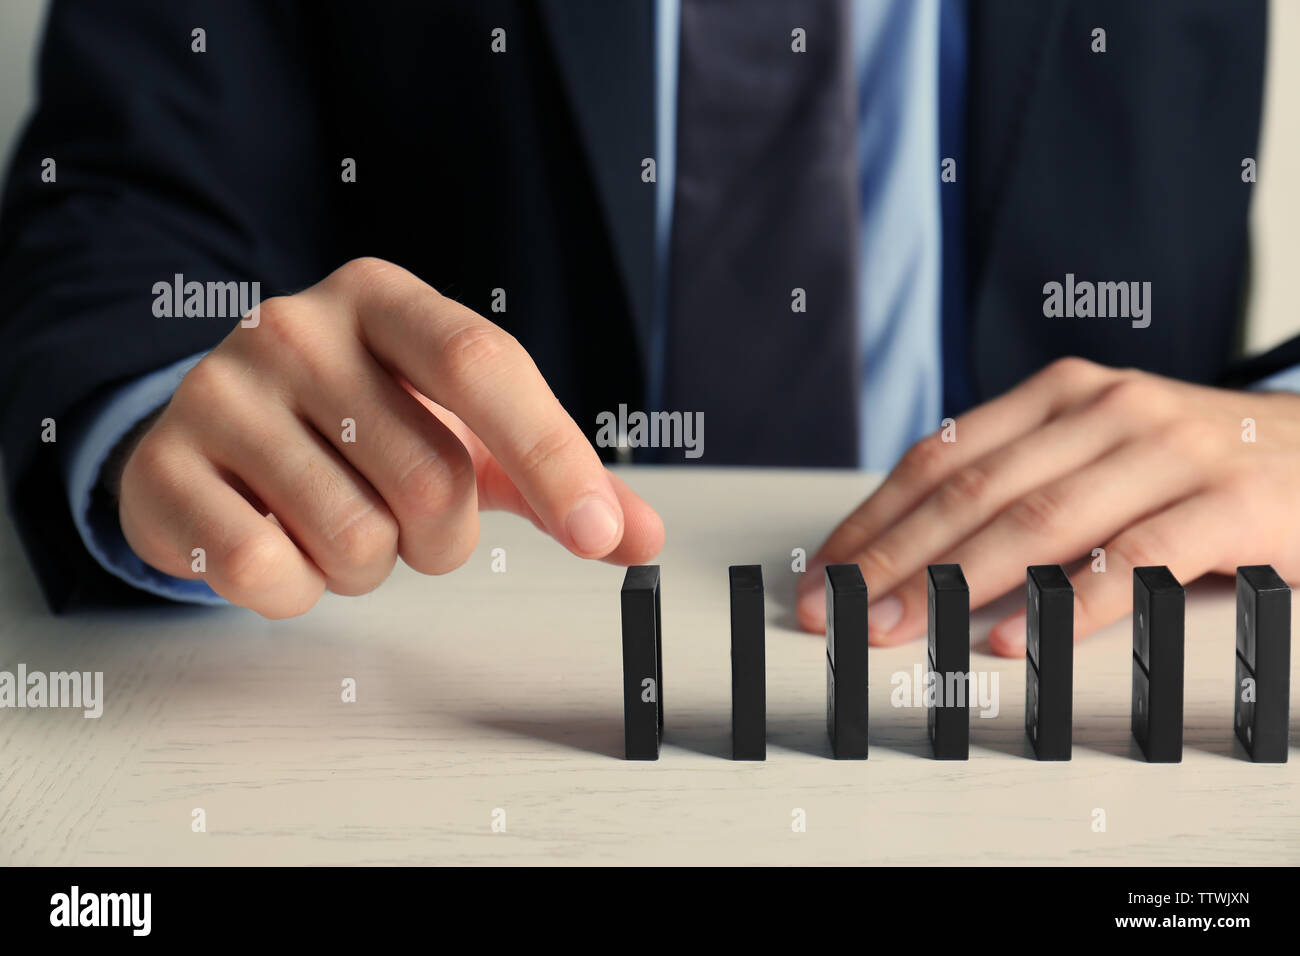 Businessman hand trying to toppling dominoes on table Stock Photo